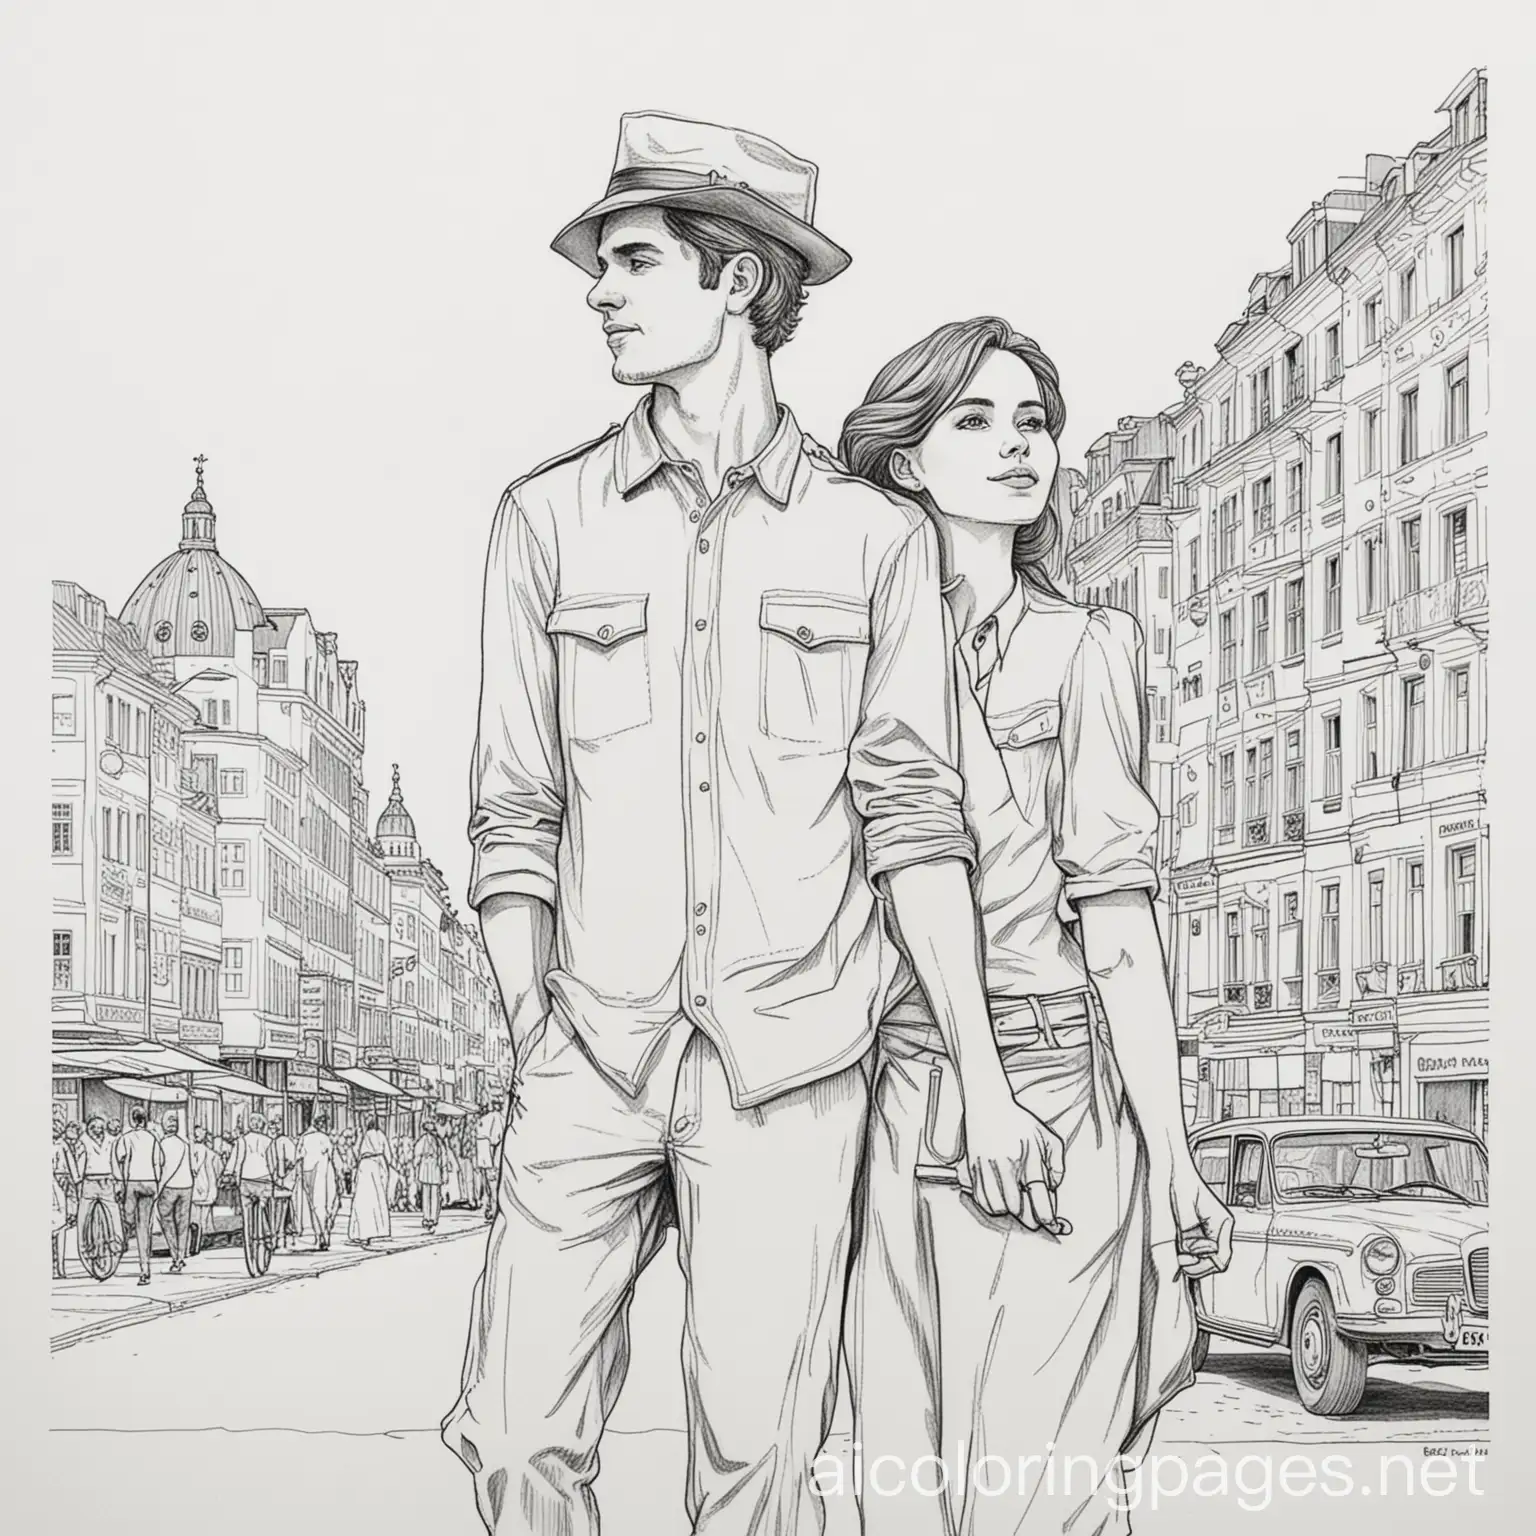 Man and Woman in Berlin Germany, Coloring Page, black and white, line art, white background, Simplicity, Ample White Space. The background of the coloring page is plain white to make it easy for young children to color within the lines. The outlines of all the subjects are easy to distinguish, making it simple for kids to color without too much difficulty